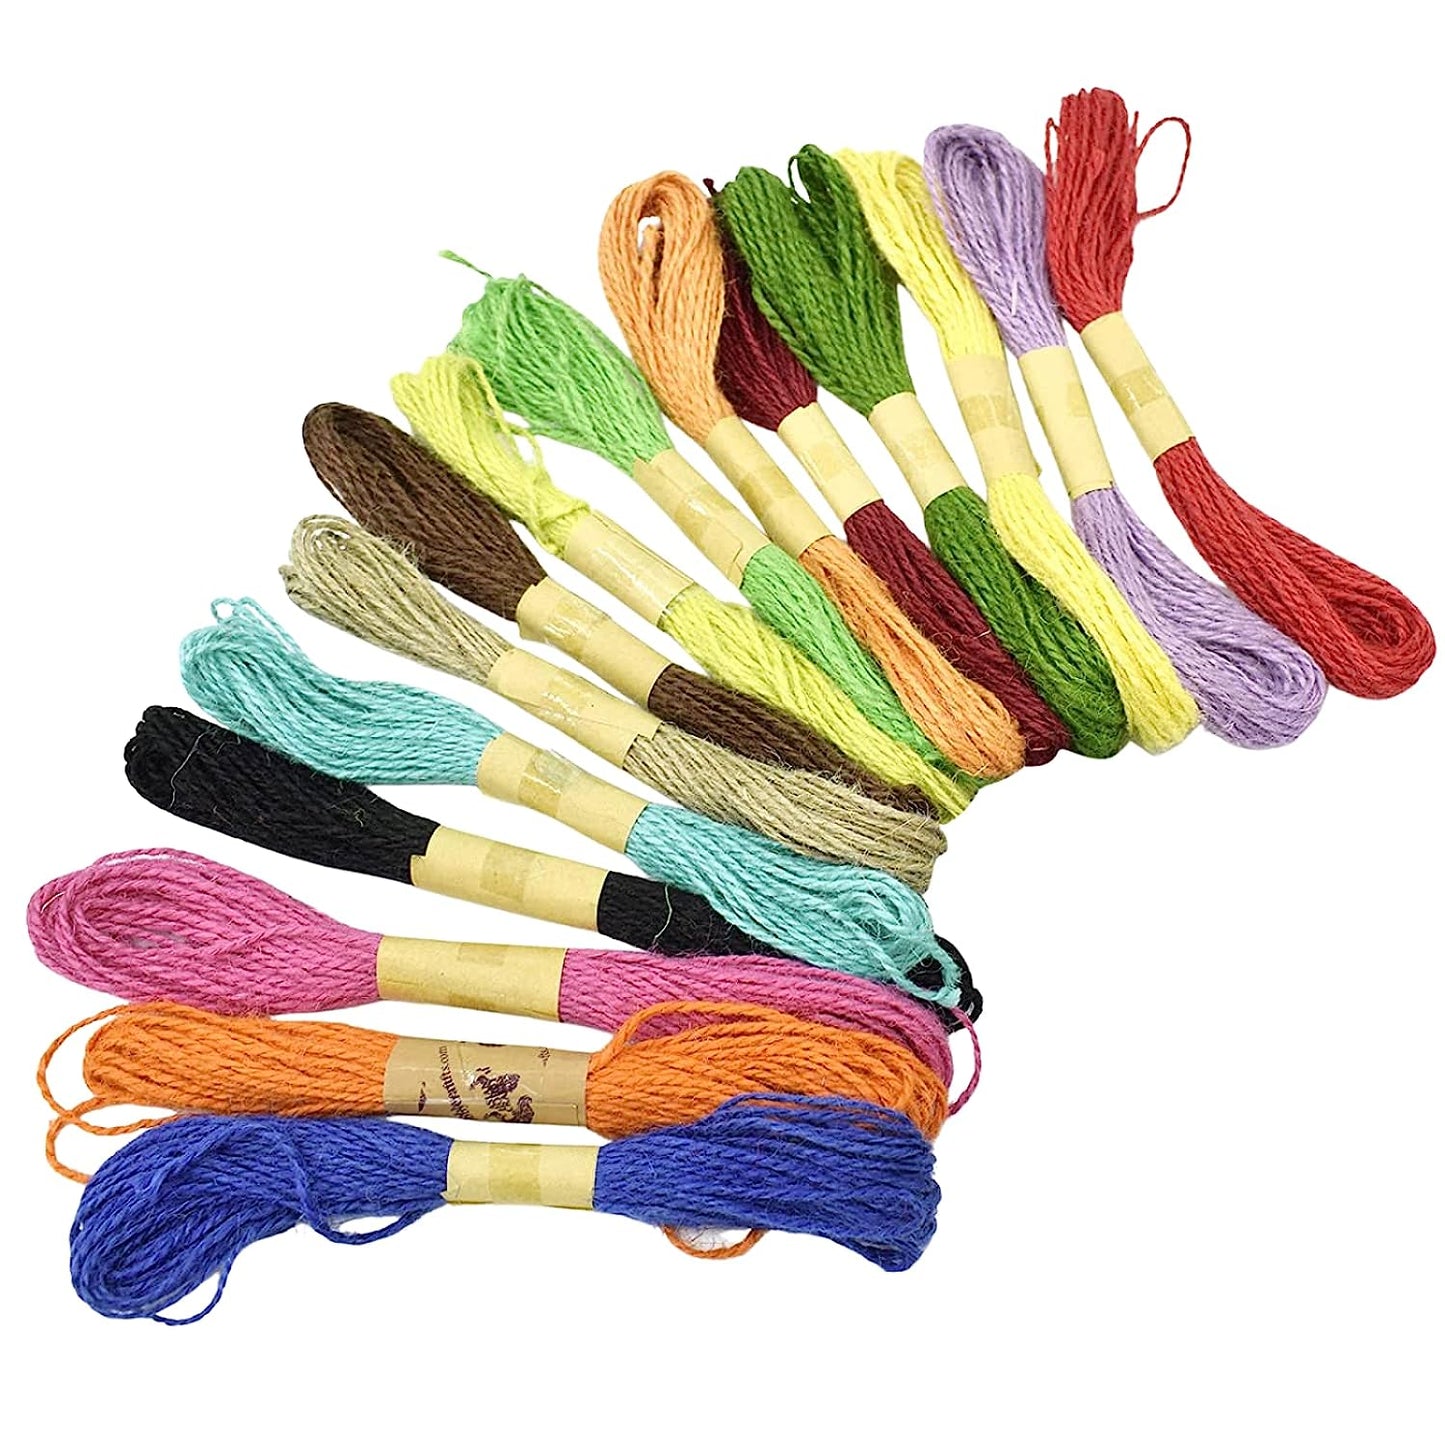 Colored Jute Twine Cord 2mm, Pack of 12 Multi Colored Threads (10 Meters Each)